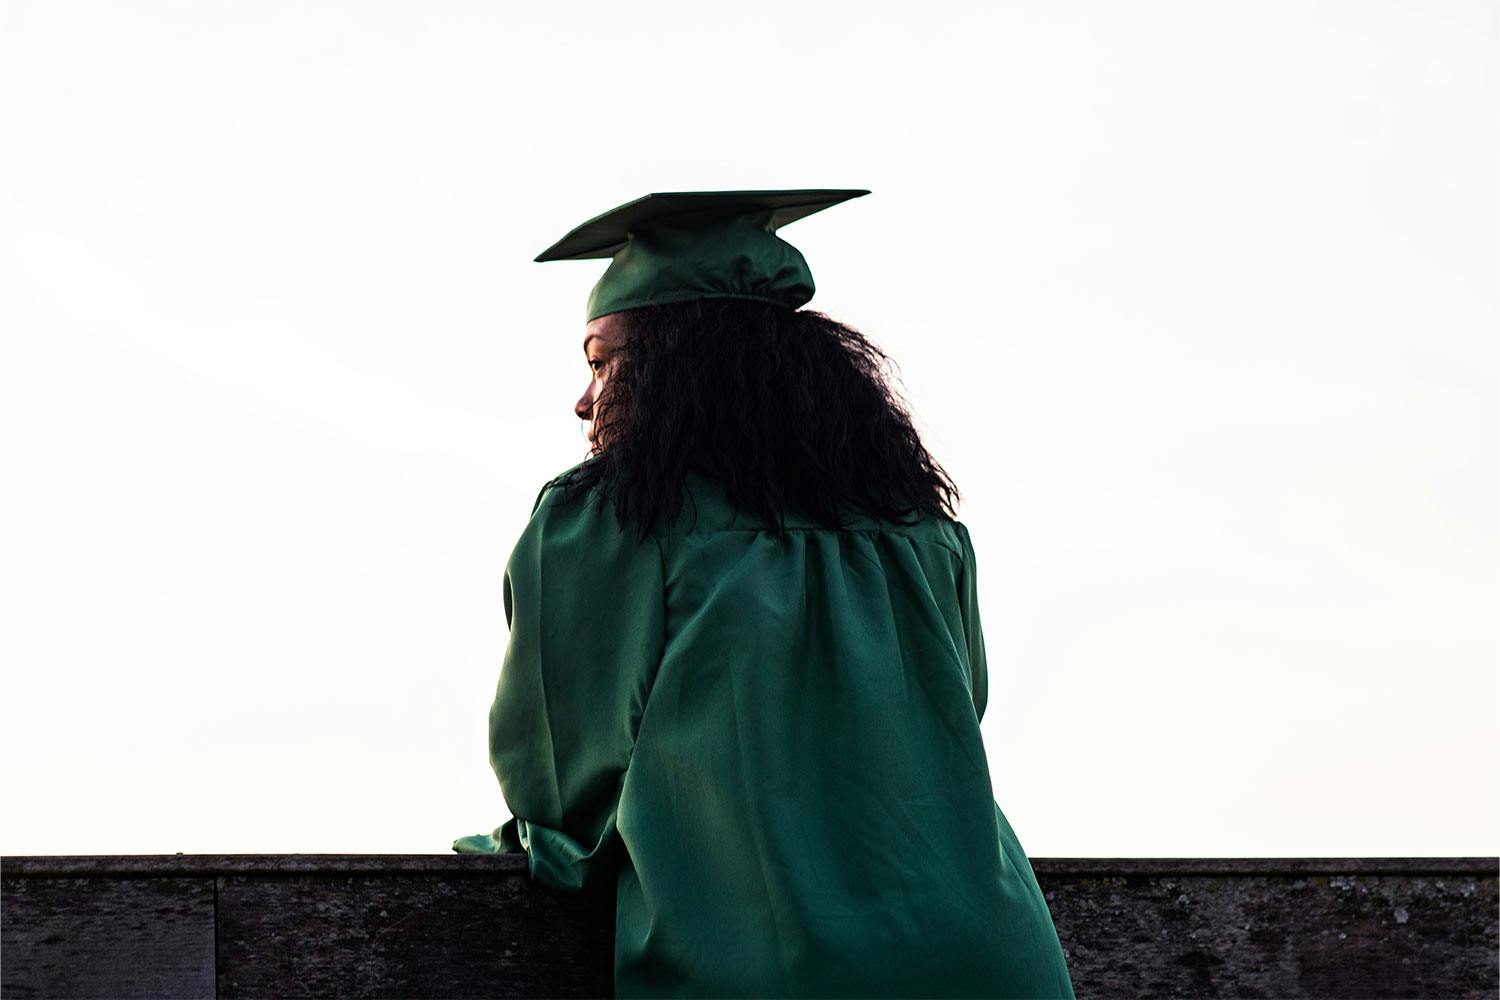 A woman with brown skin, dark hair, wearing a green graduation cap and gown leans against a concrete ledge, looking stoic.